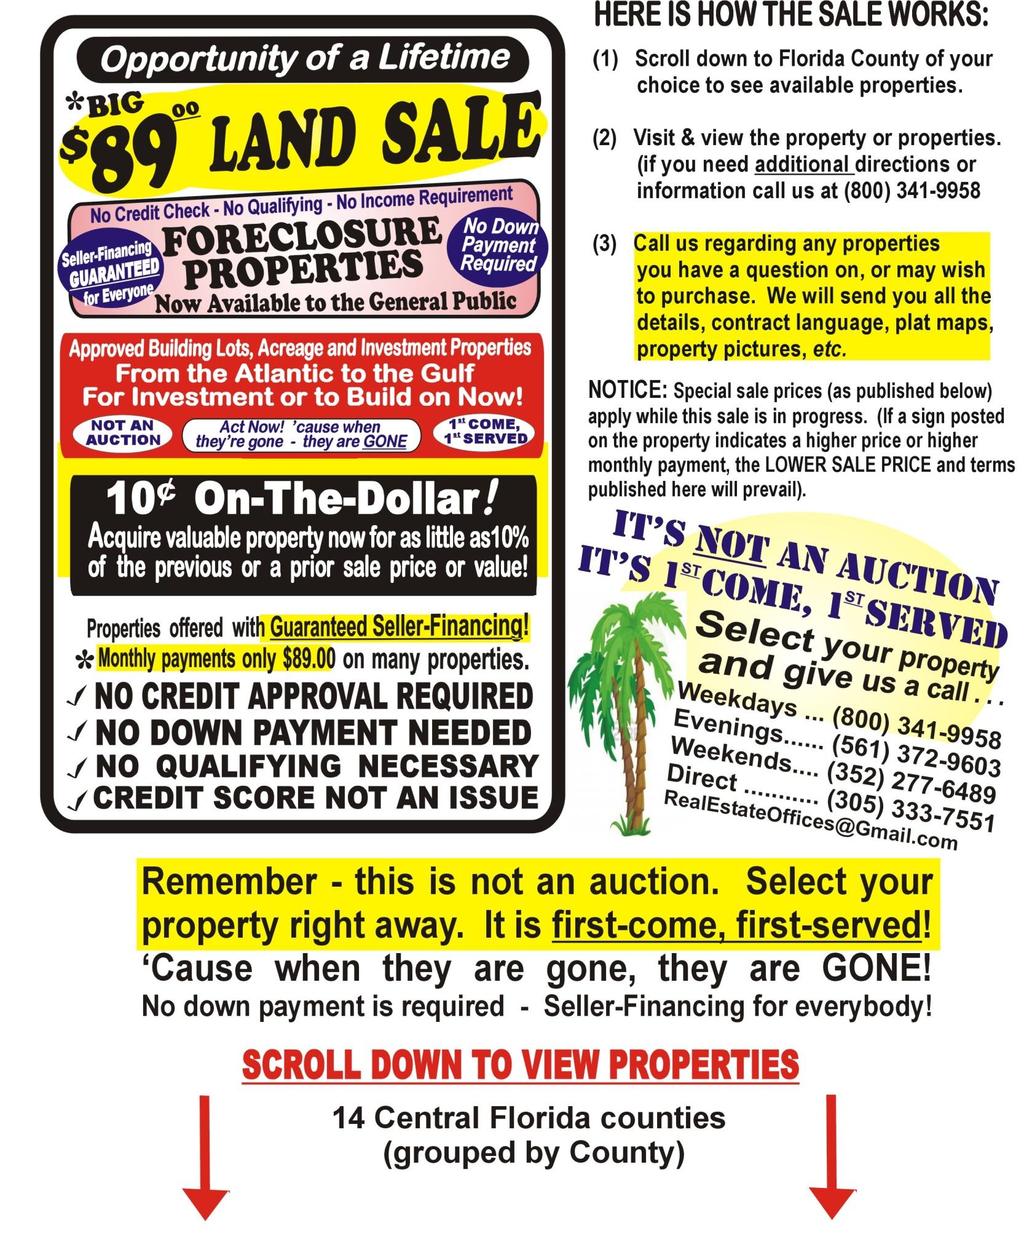 BE SURE TO TAKE ADVANTAGE OF THS $89 LAND SALE AND REDUCED SALE S WHLE THE